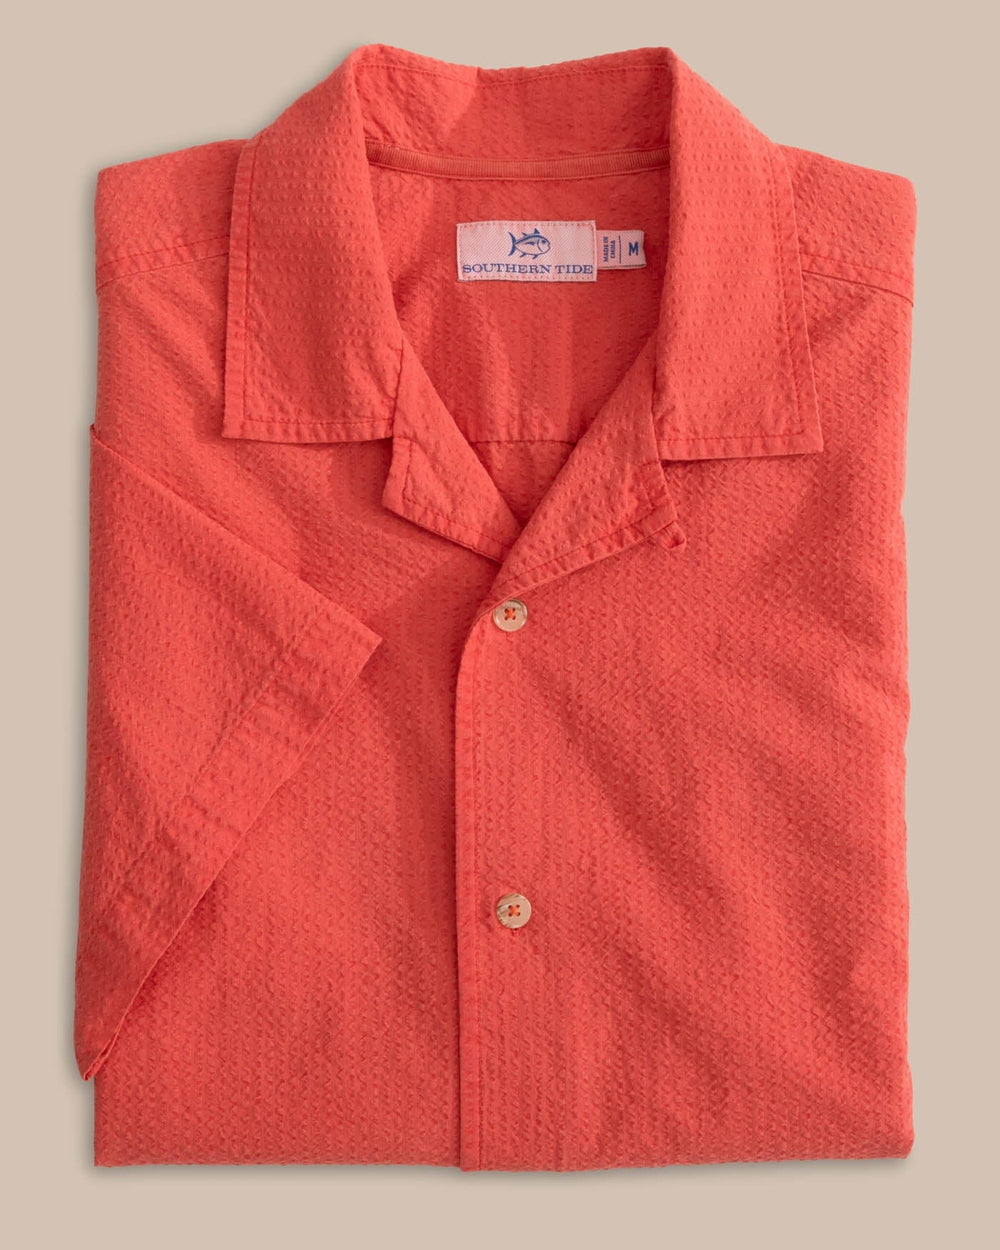 The front view of the Southern Tide Sun Washed Seerscuker Camp Short Sleeve Sport Shirt by Southern Tide - Paprika Red